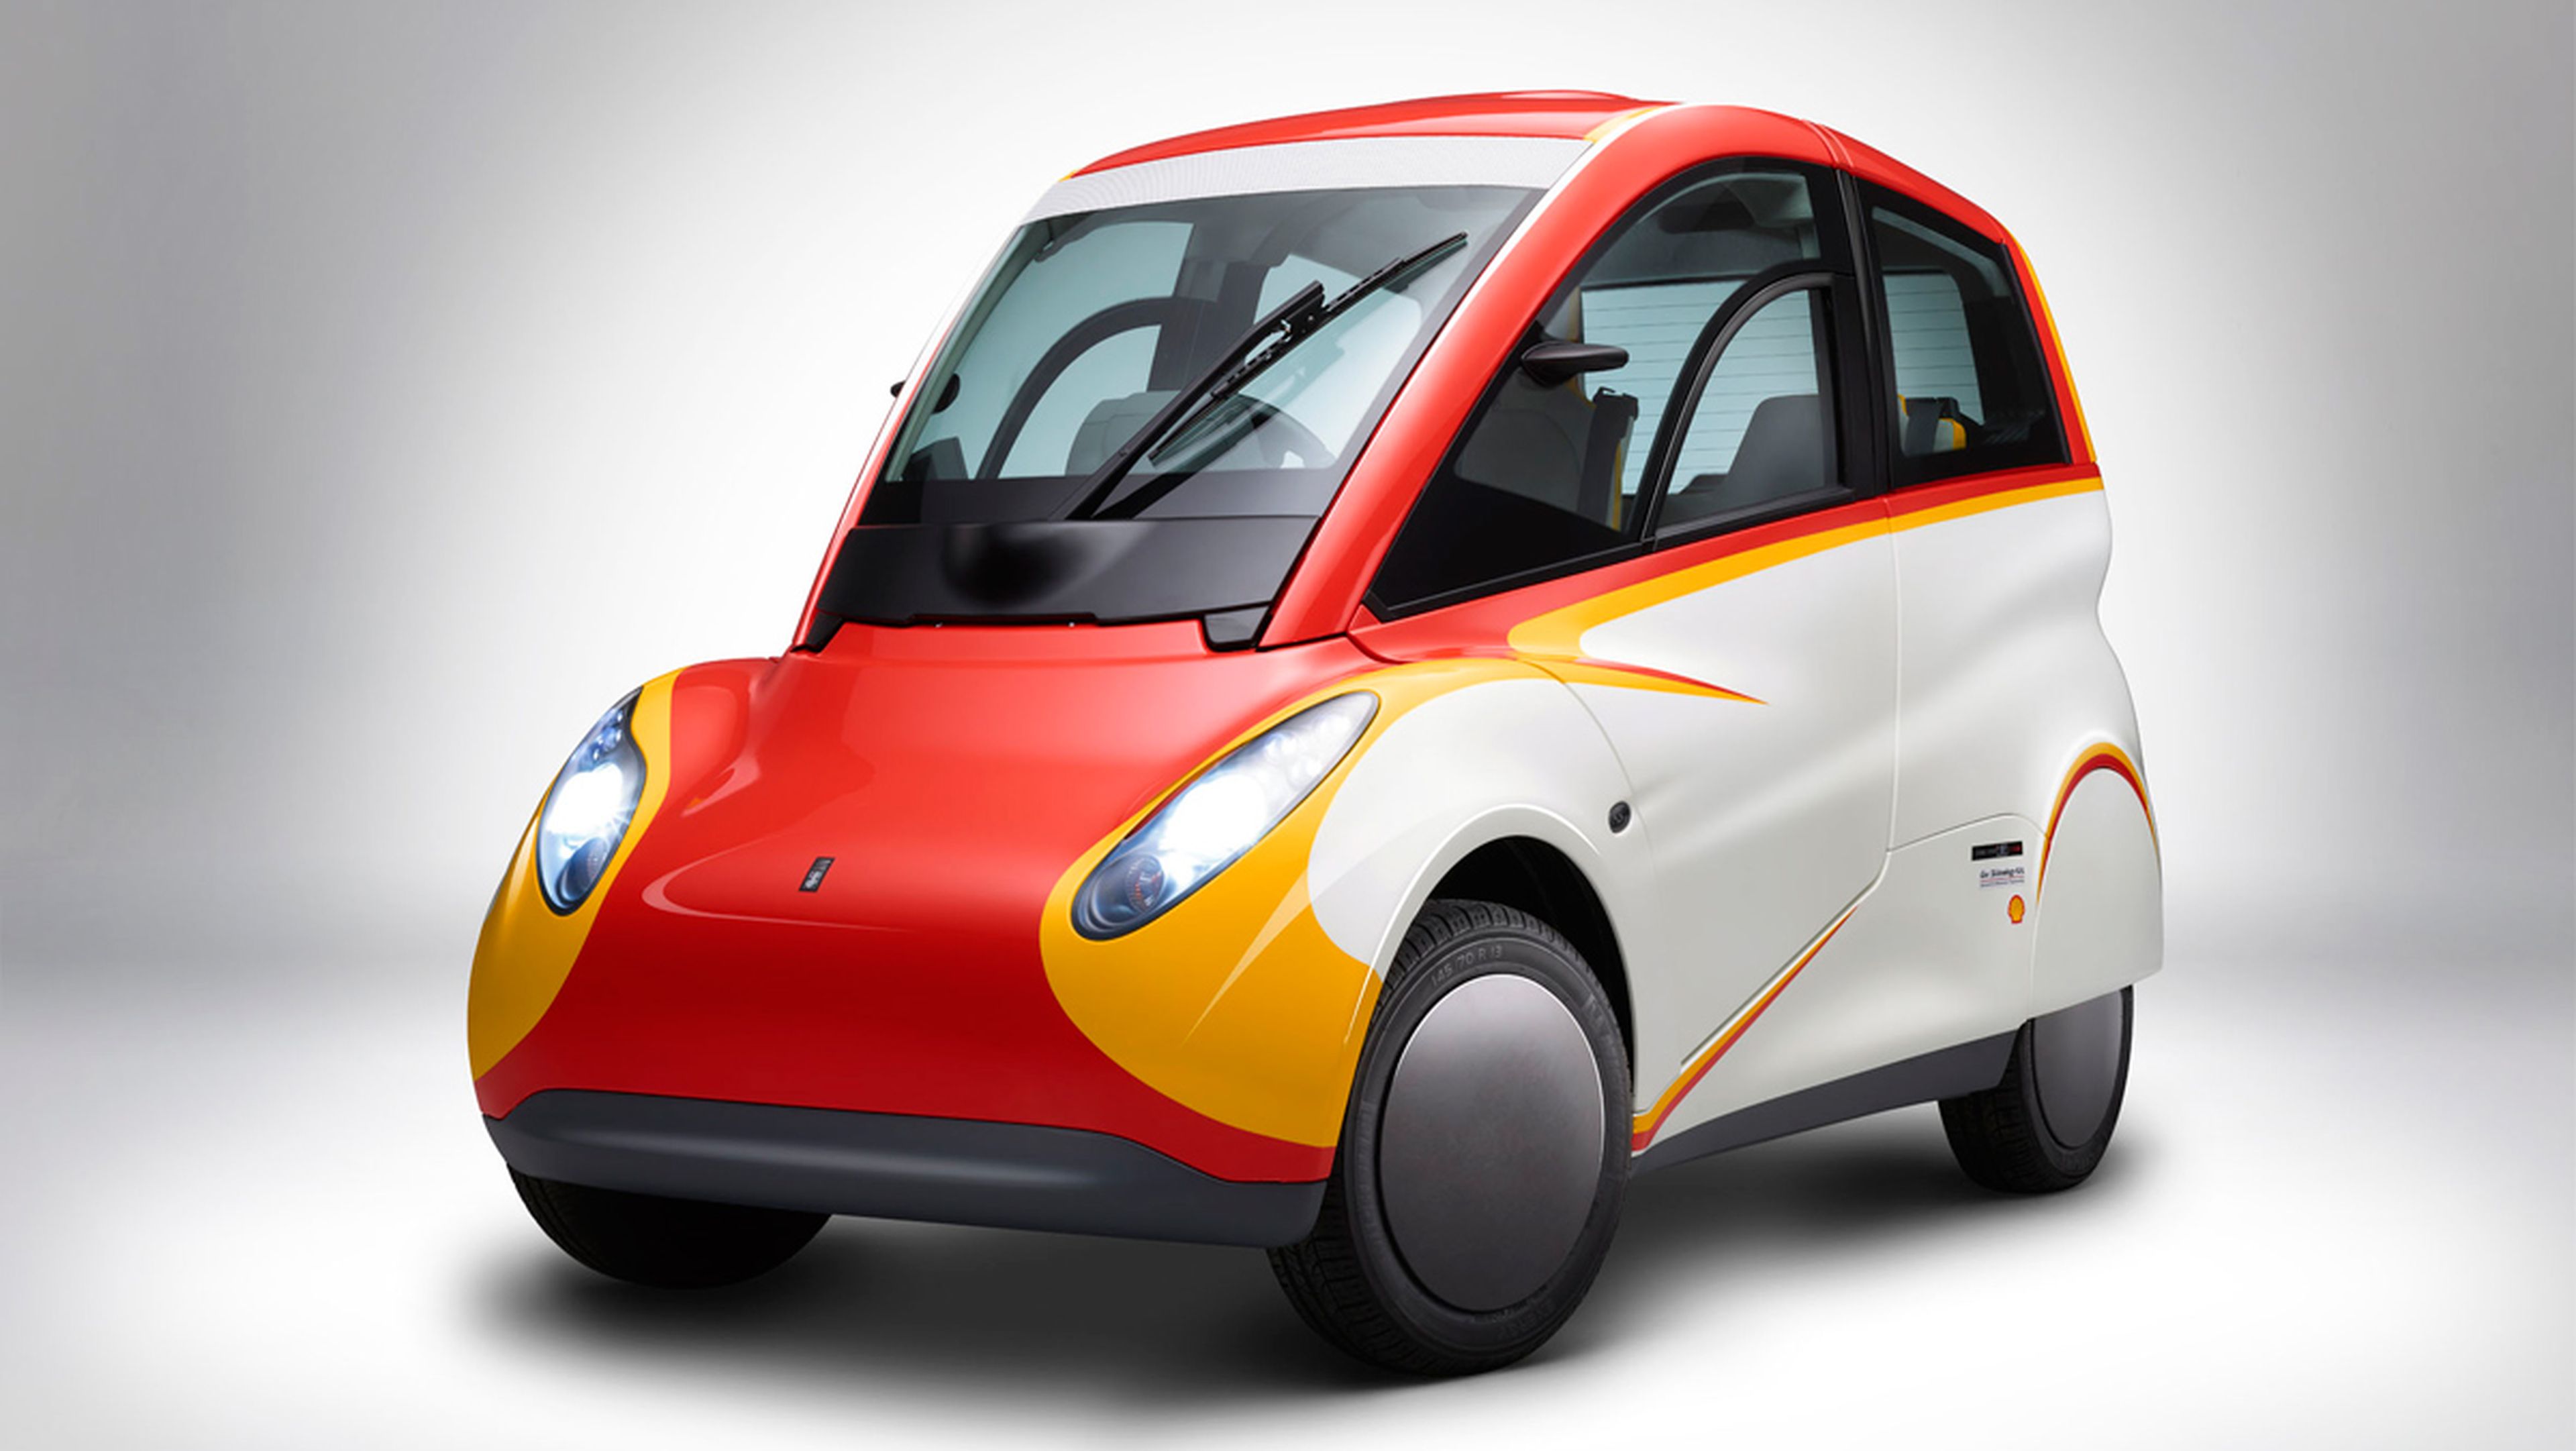 Shell Concept Car, frontal